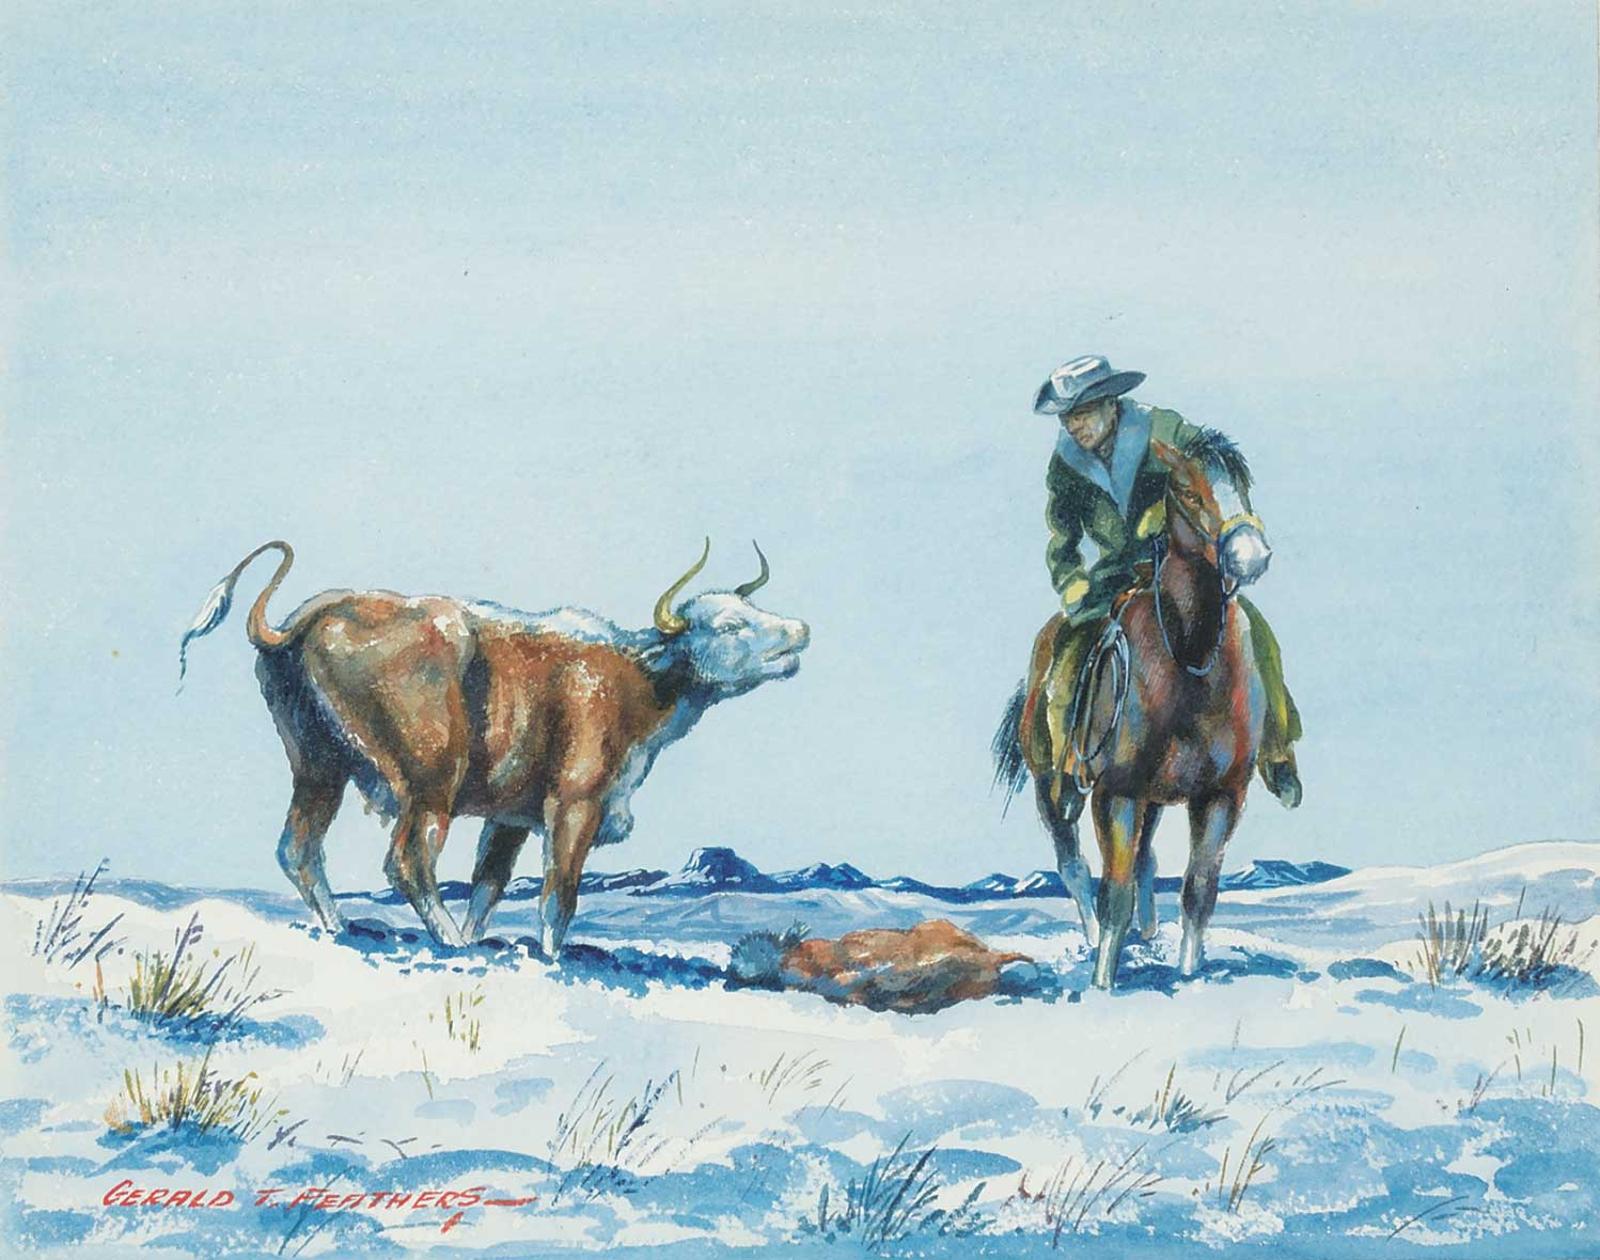 Gerald T. Tailfeathers (1925-1975) - Untitled - The New Calf